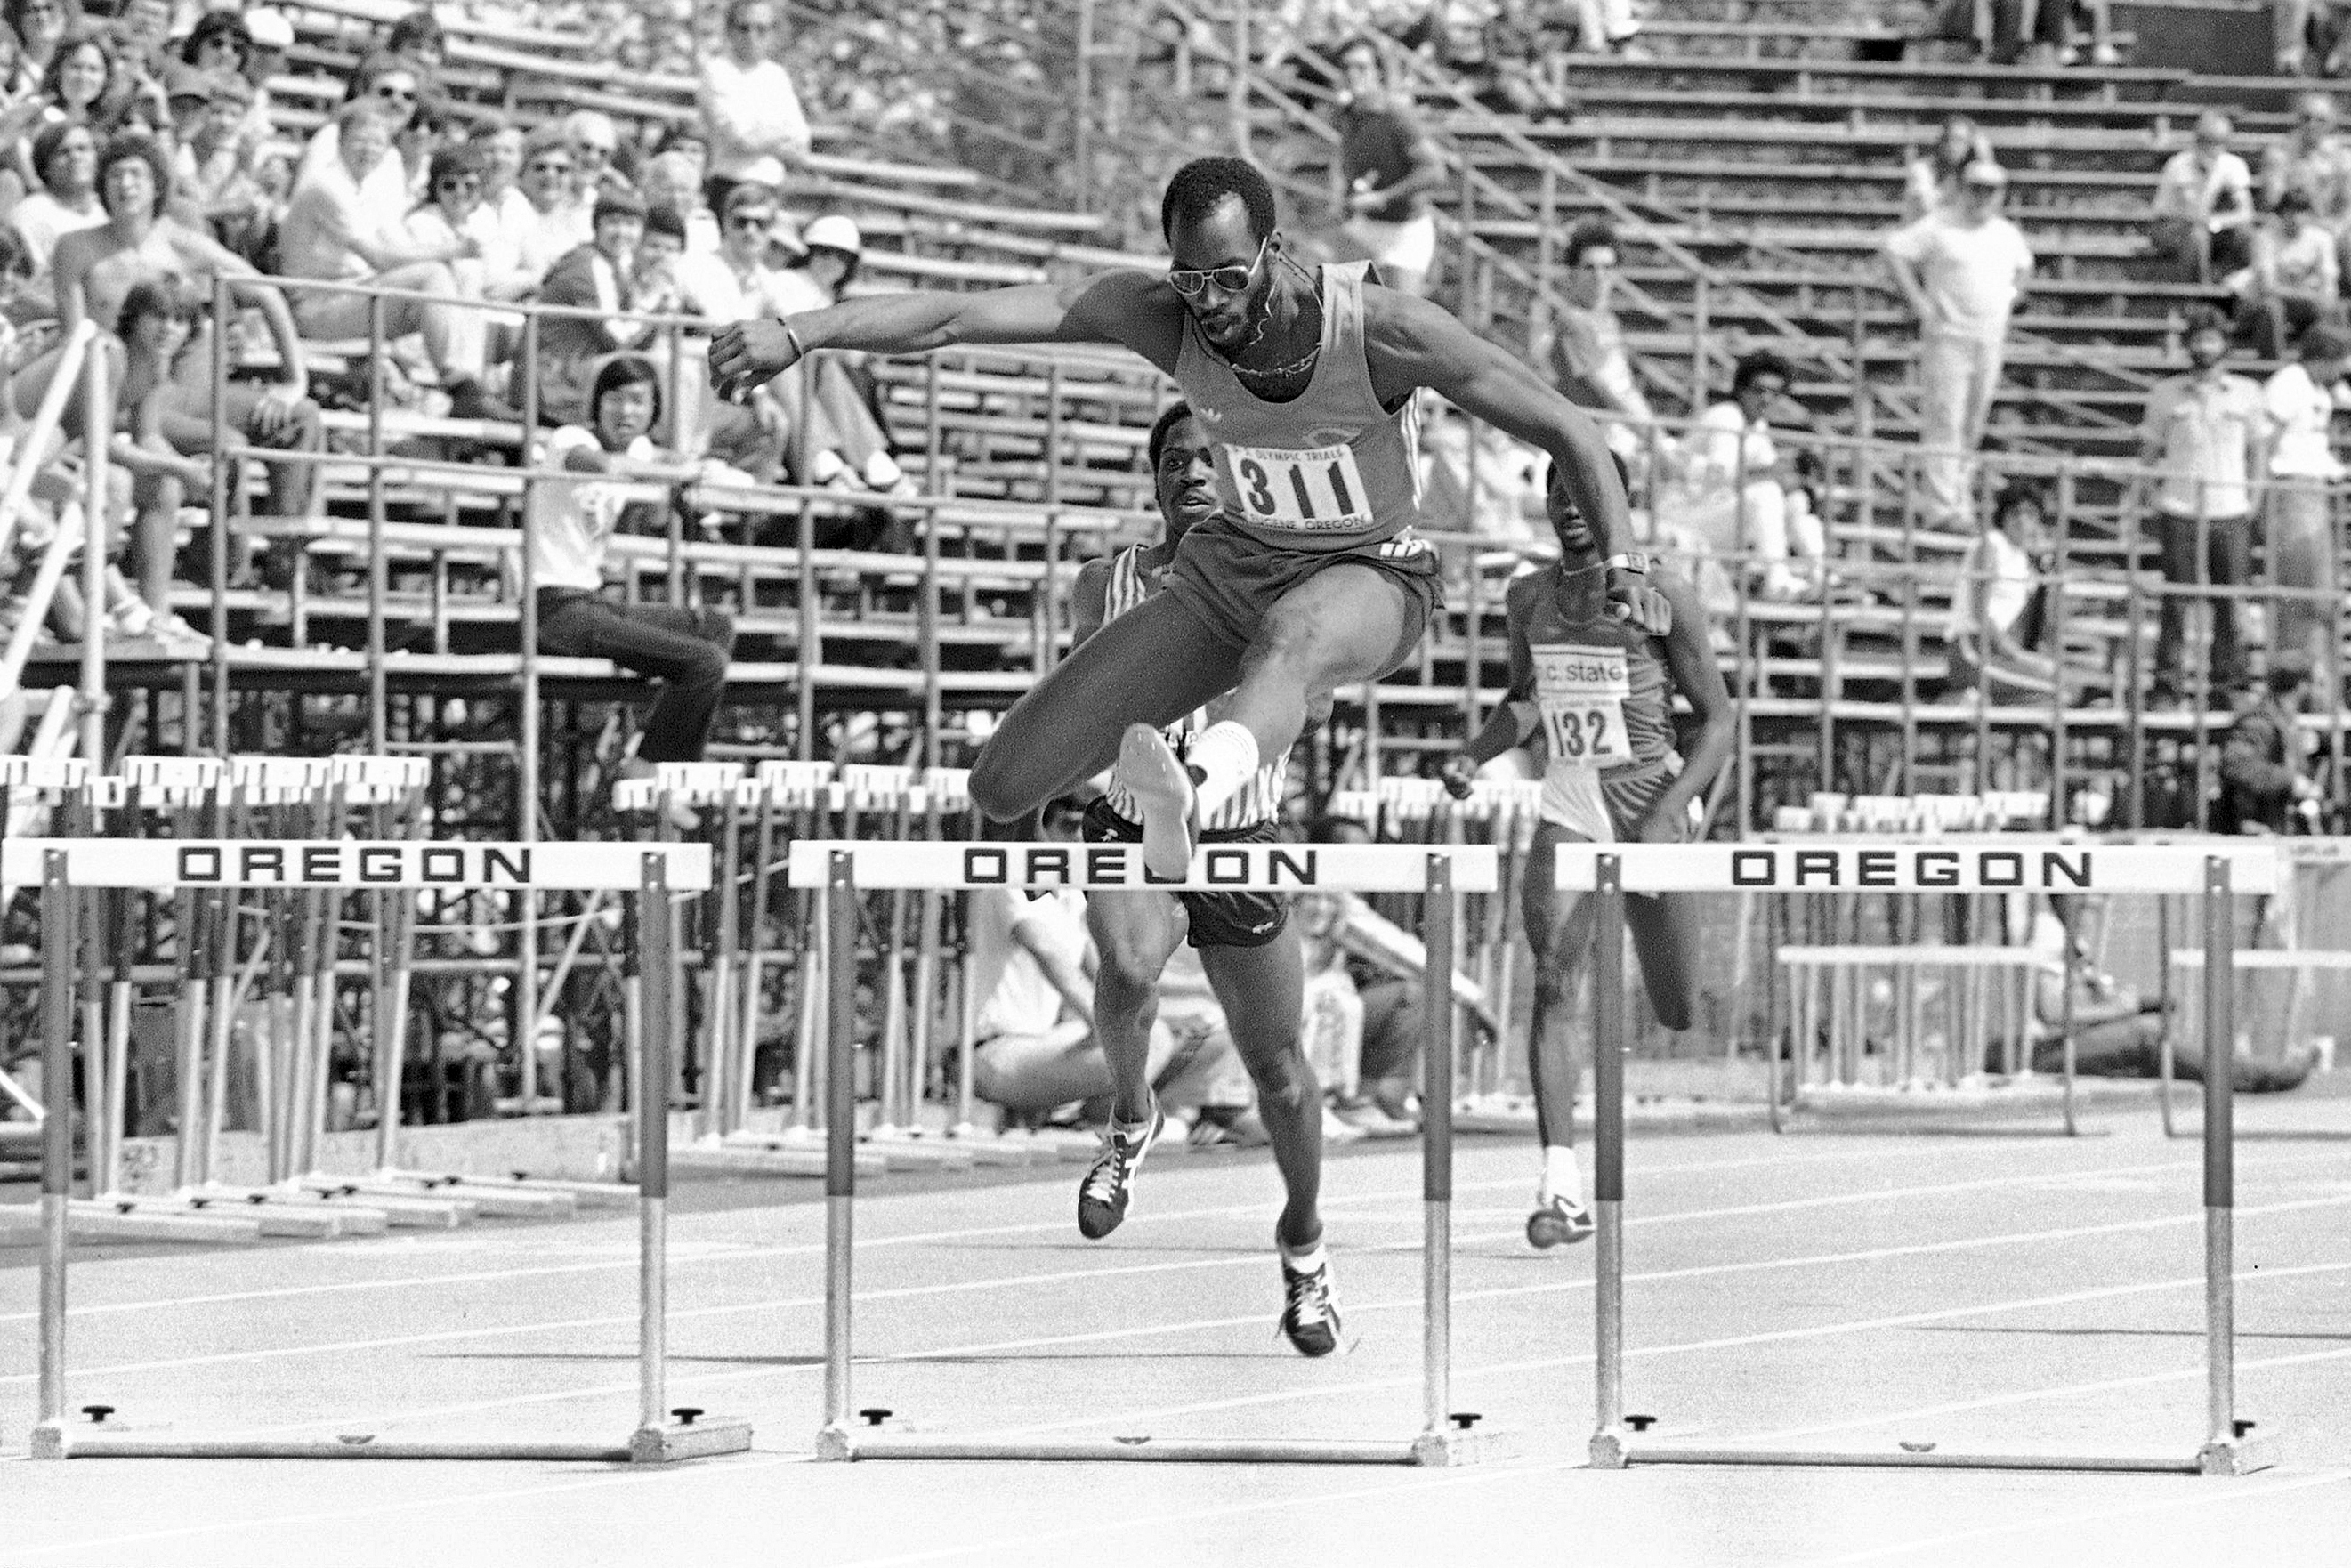 FILE - In this June 21, 1980 file photo, Montreal 1976 gold medal winner Edwin Moses wins the 400 intermediate hurdles at the 1980 Olympic Trials in Eugene, Oregon.  Moses, the man who once won a remarkable 107 finals.  consecutive years from 1977 to 1987 and who reduced the world record to 47.02 seconds in his prime, says he has enjoyed watching hurdlers break new hurdles for the past two years.  (Photo/AP file)